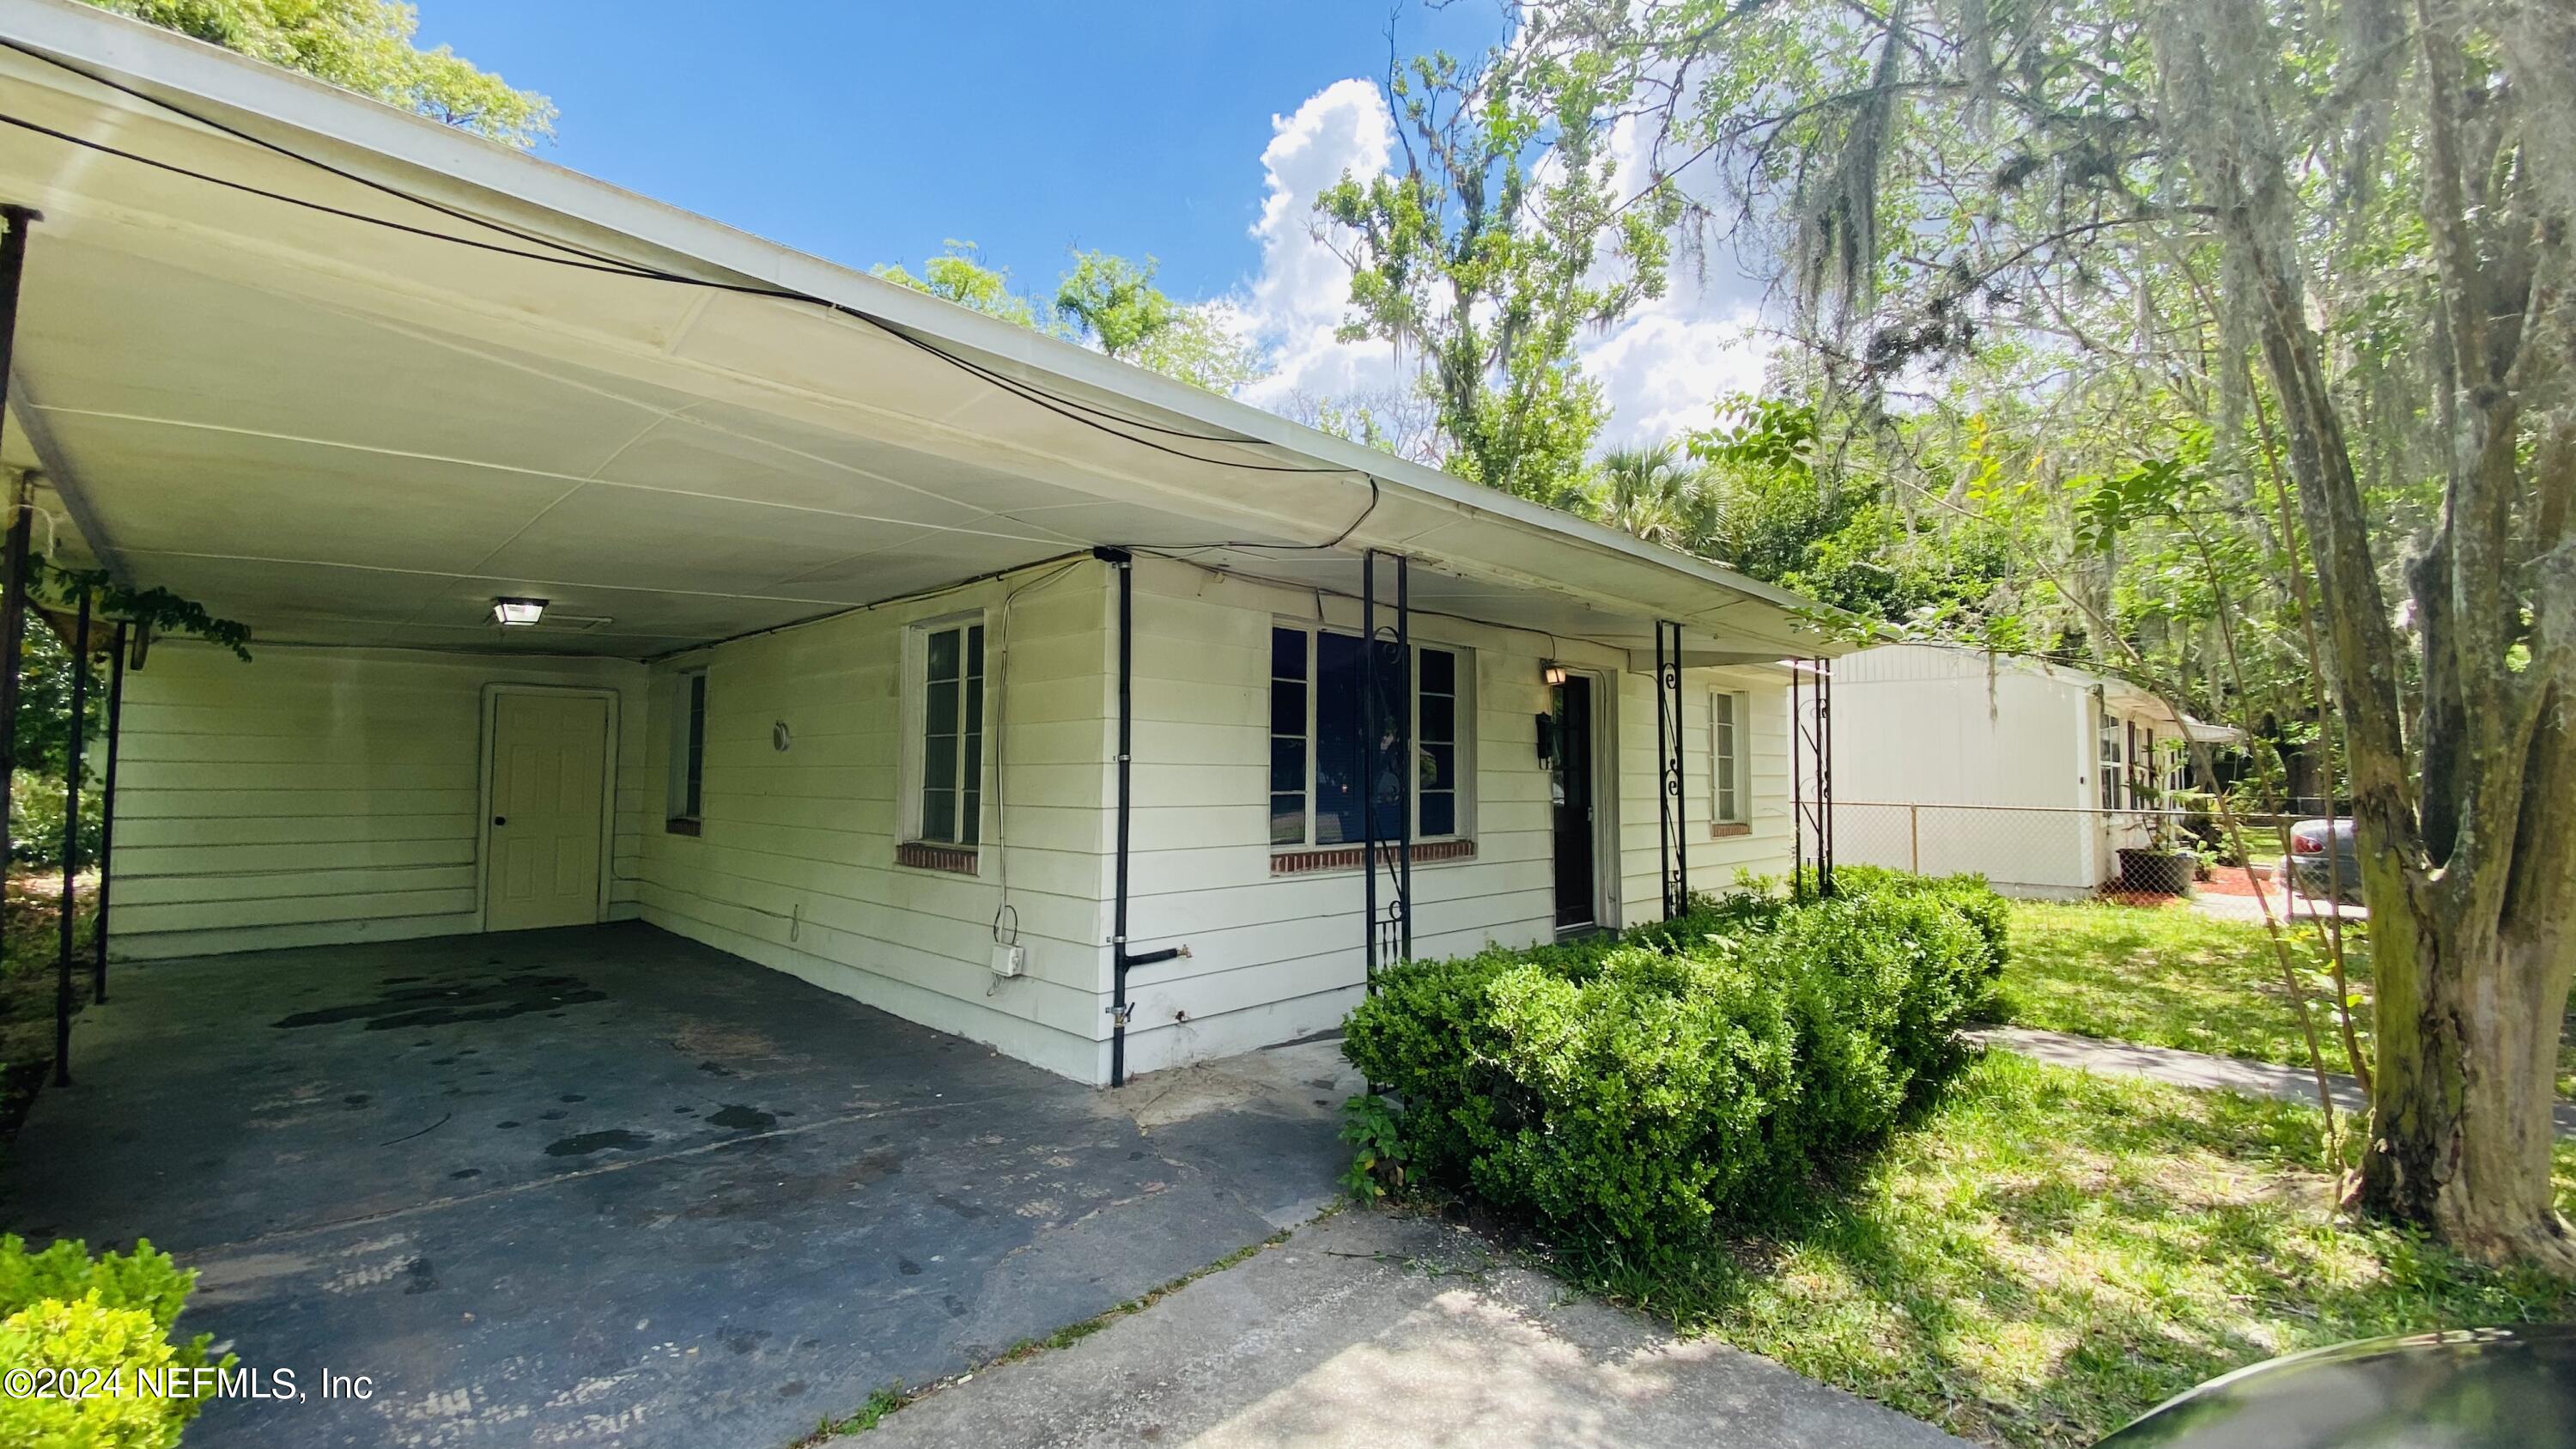 Jacksonville, FL home for sale located at 9161 7th Avenue, Jacksonville, FL 32208